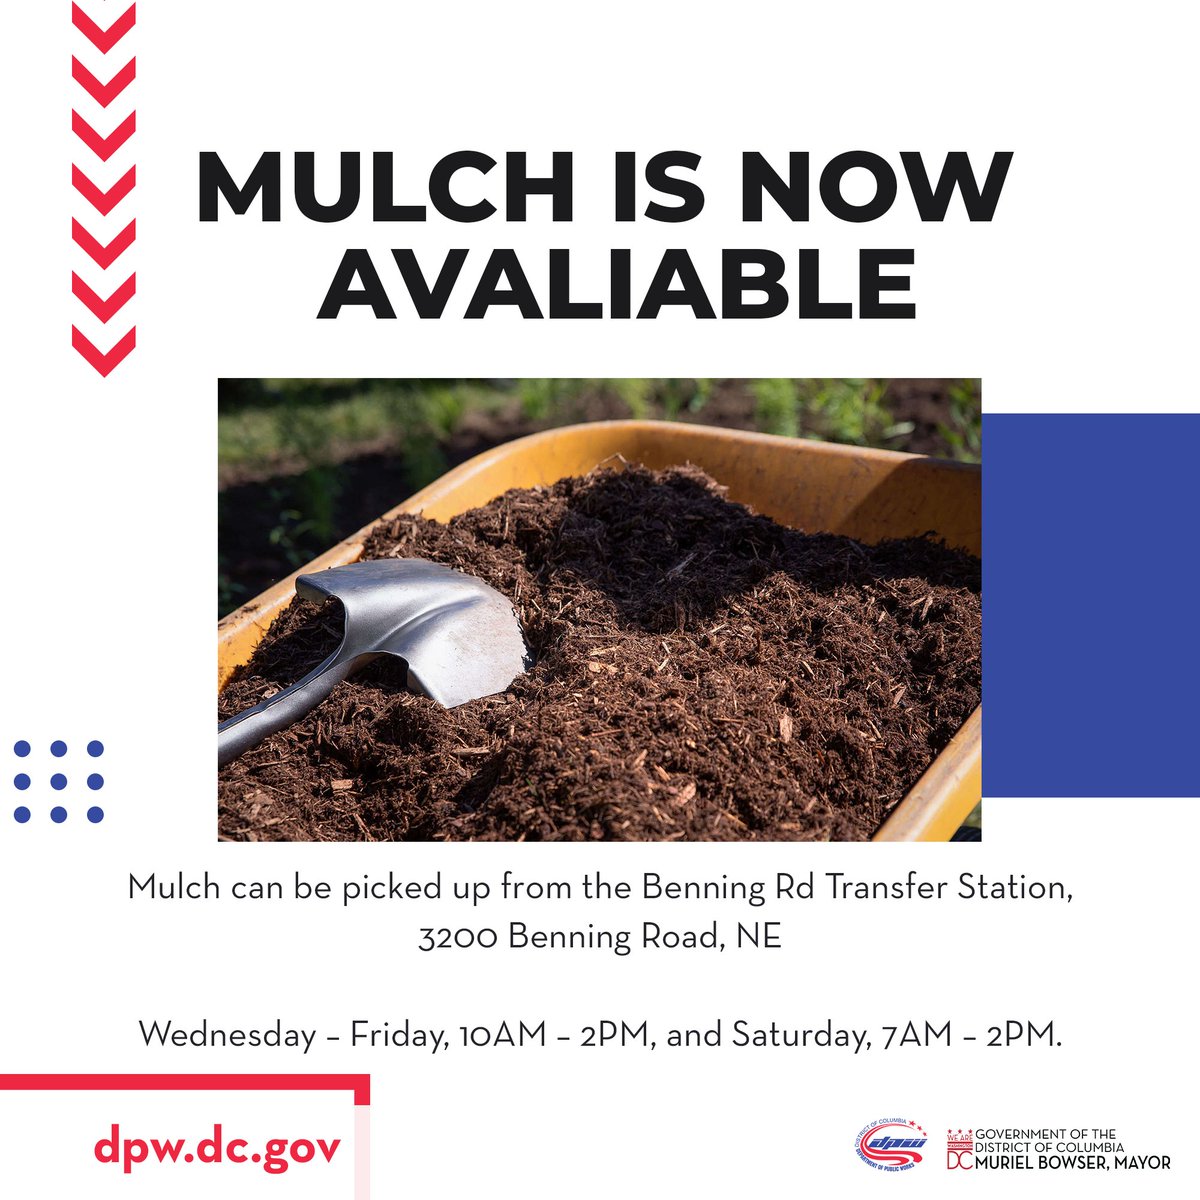 Finish your yard work with compost from the Benning Road Transfer Station. We offer free compost pickup Monday-Friday 1p-5p & Saturdays 8a-3p. Visit our website for more information dpw.dc.gov/service/fort-t…